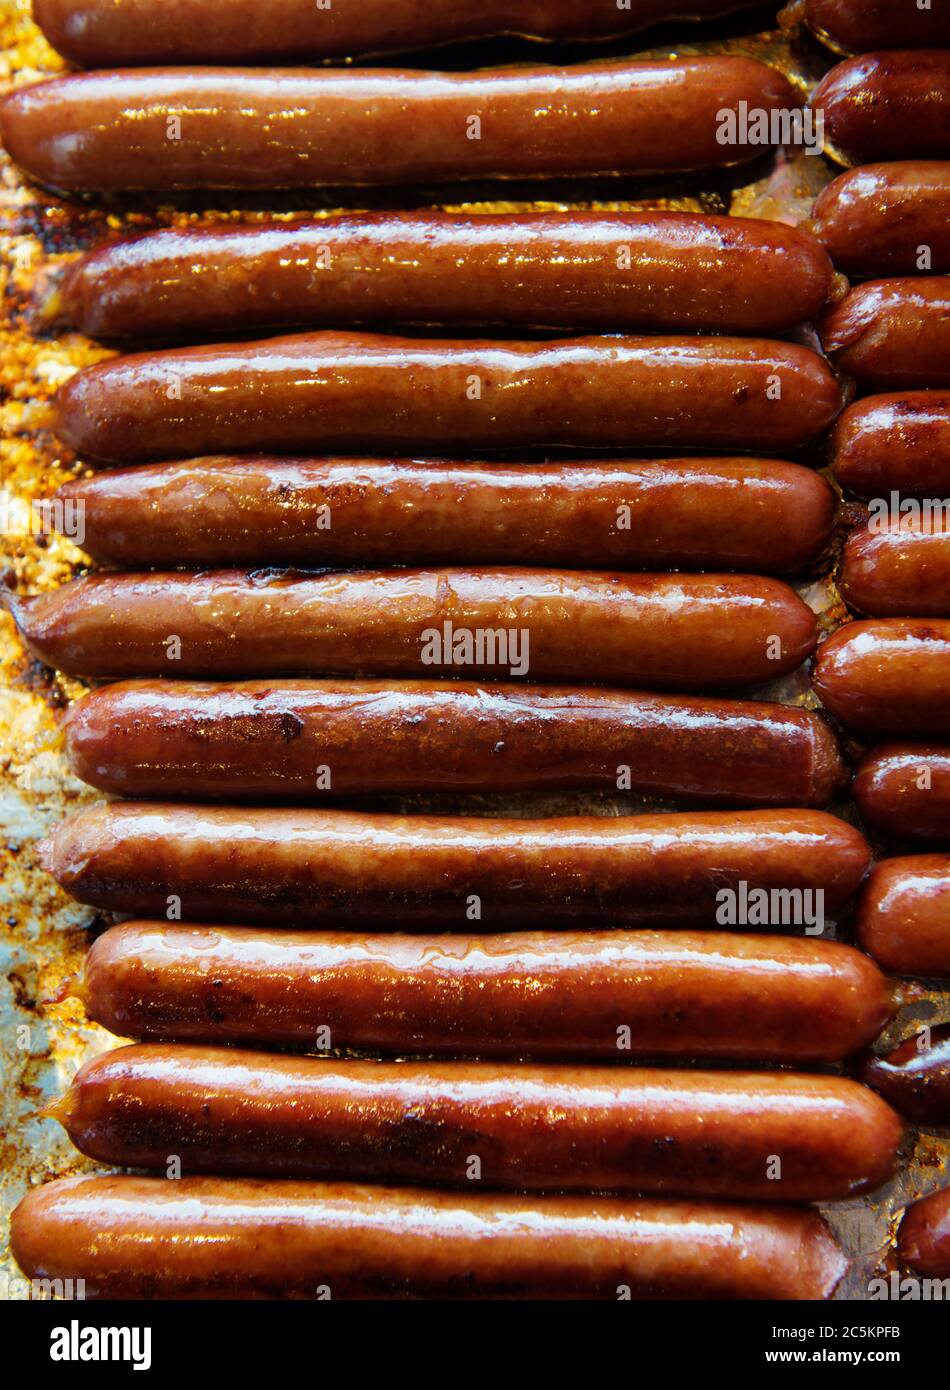 Hot dogs being cooked at a deli Stock Photo